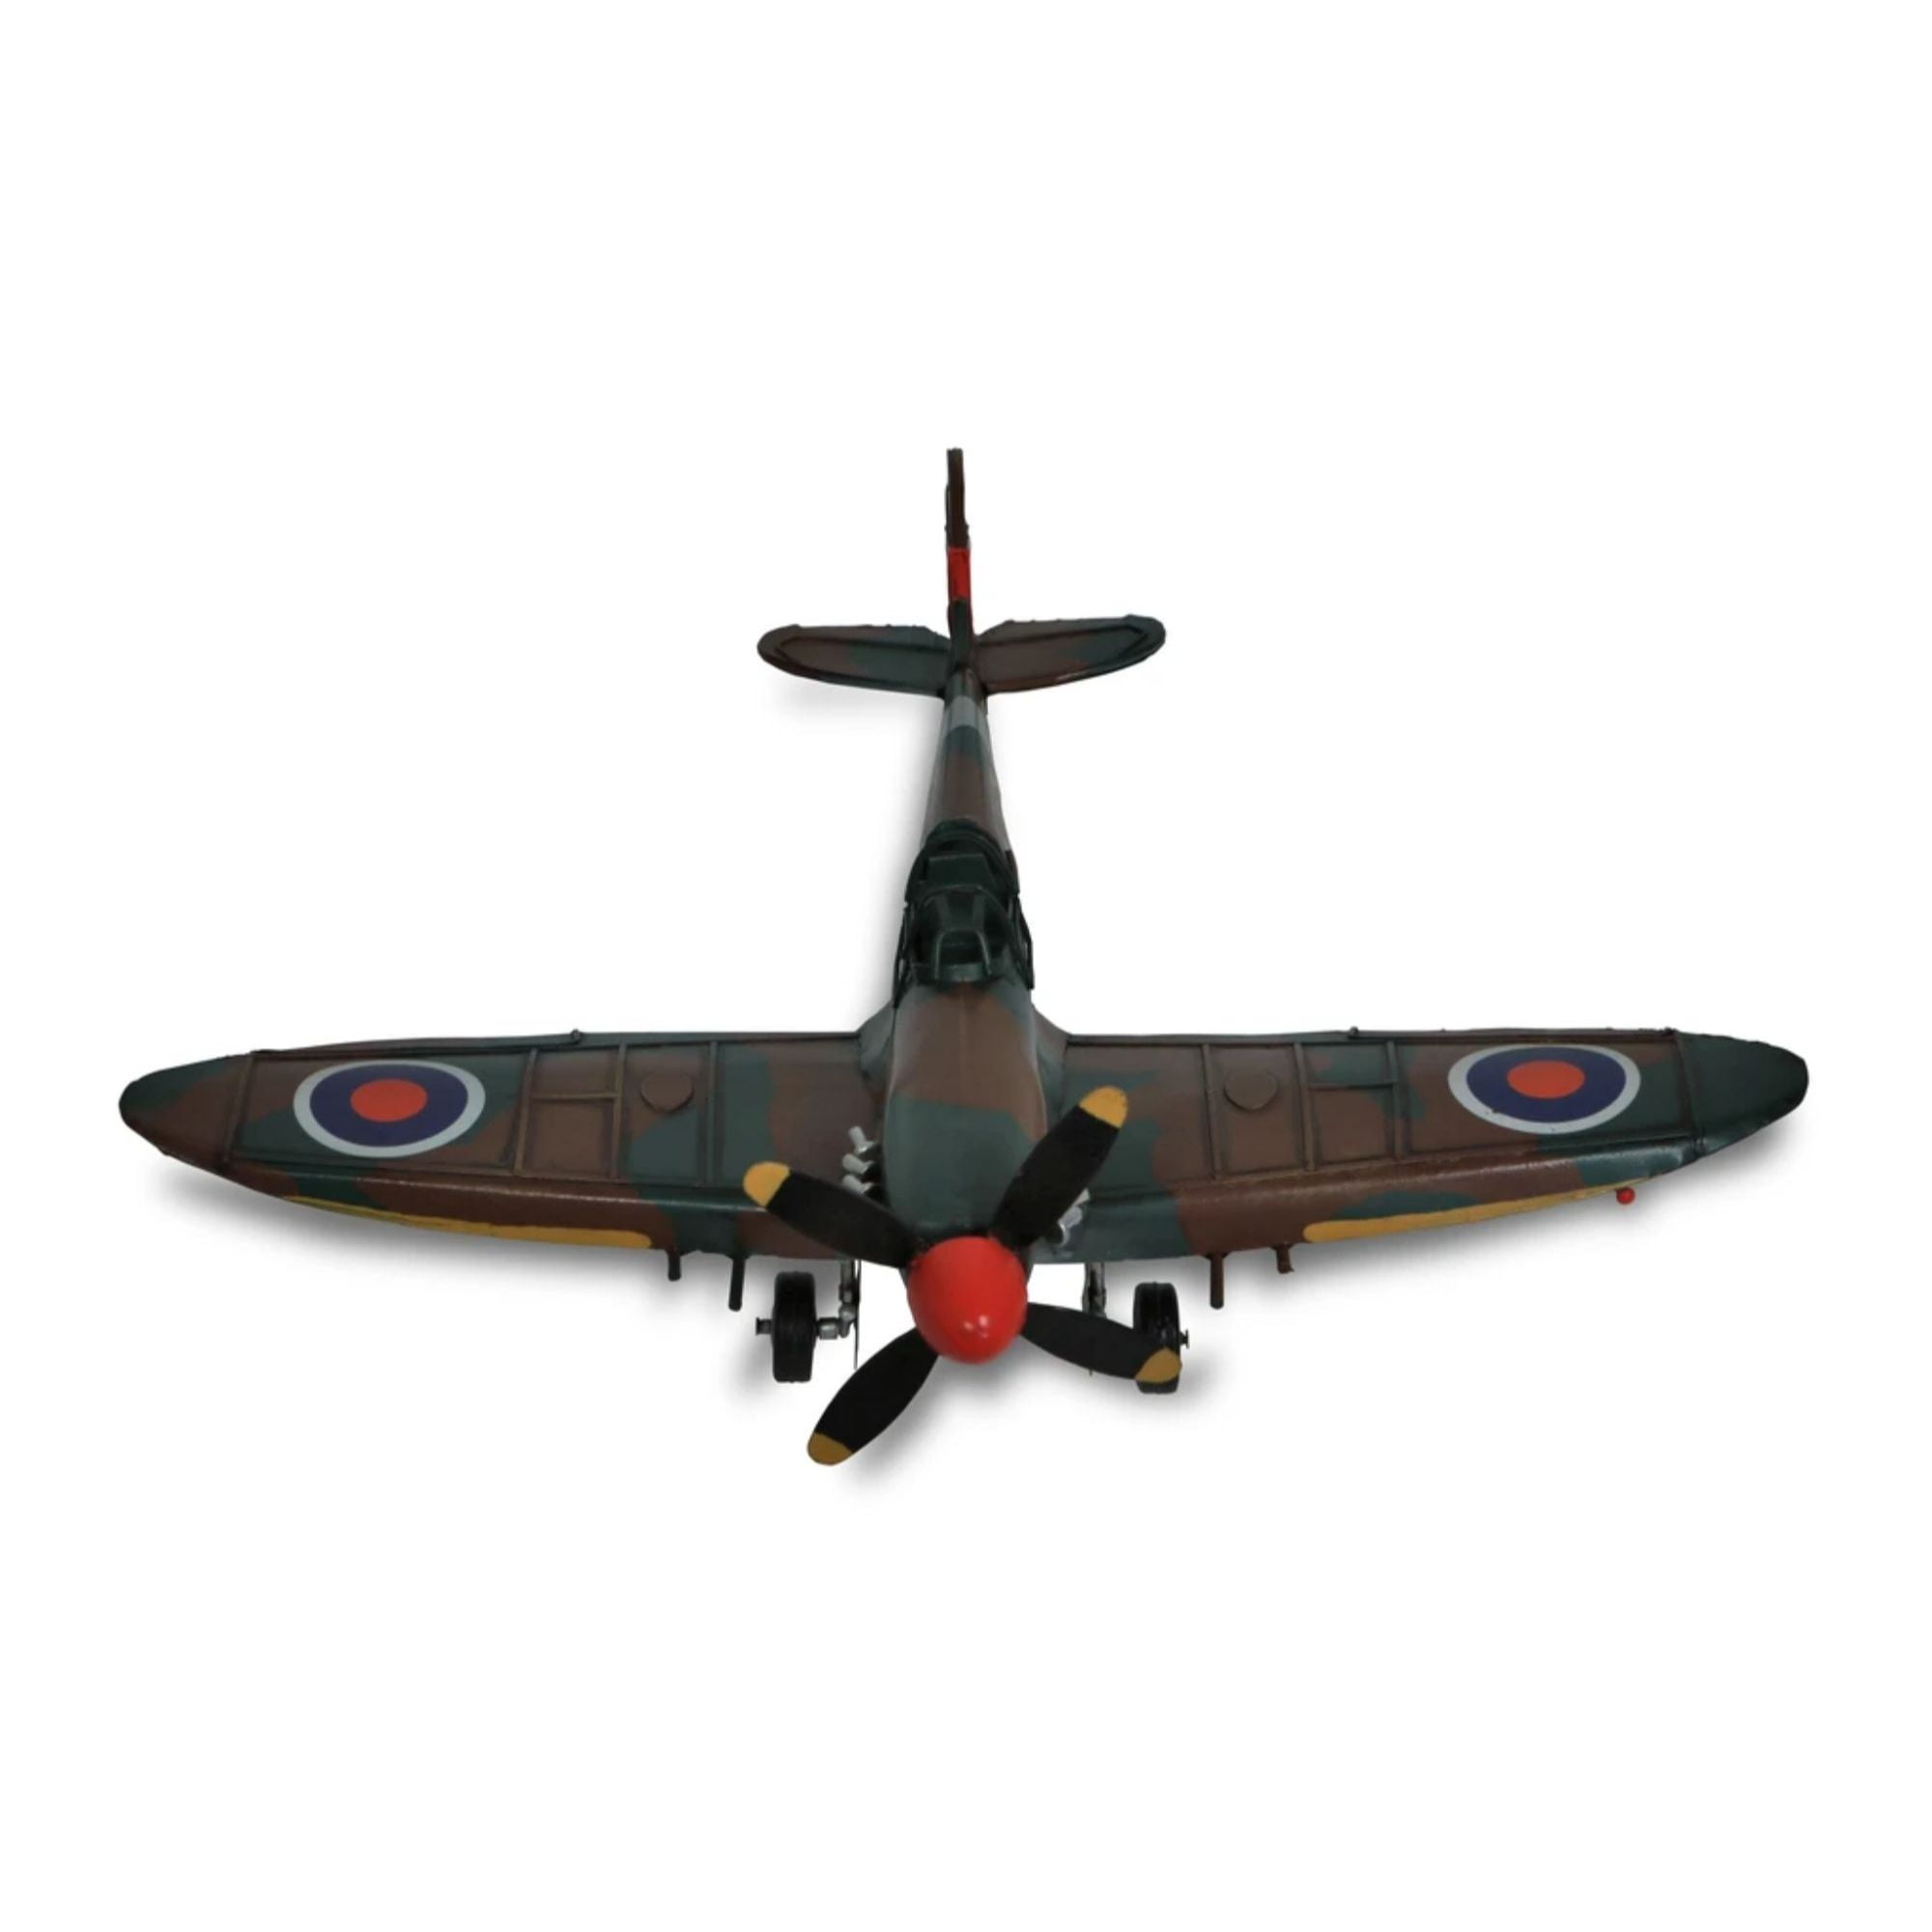  TOY PLAYER Spitfire Fighter Plane Jet Buliding Set, Military Airplanes  Model, Gift for Boys Age 6 7 8 9 10 11 12 and WW2 Military SetCollectors &  Enthusiasts : Toys & Games